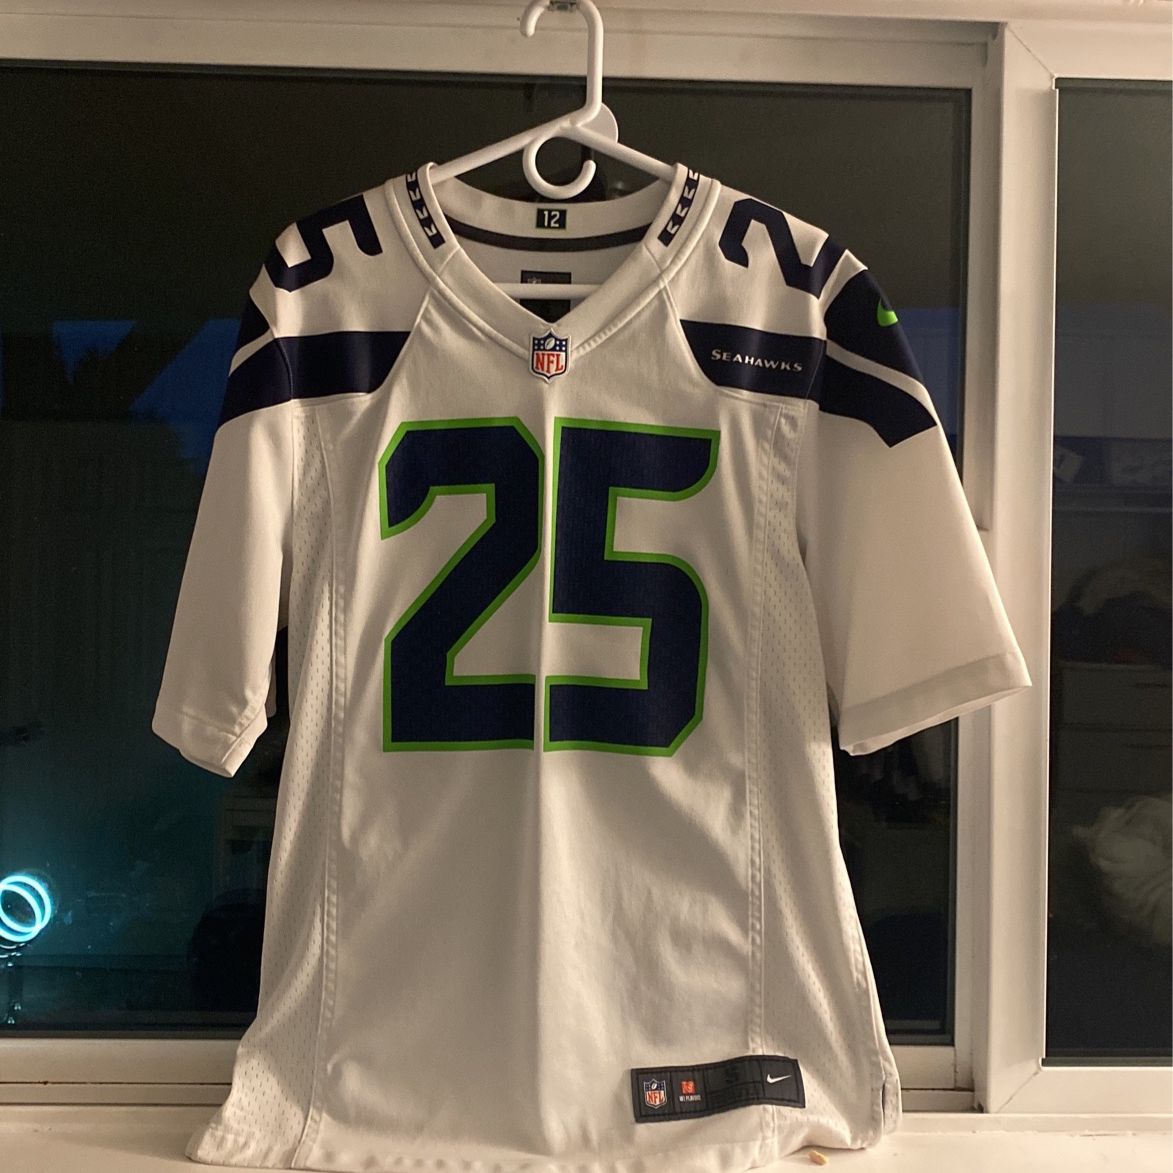 Seattle Seahawks color rush Jersey for Sale in Tacoma, WA - OfferUp